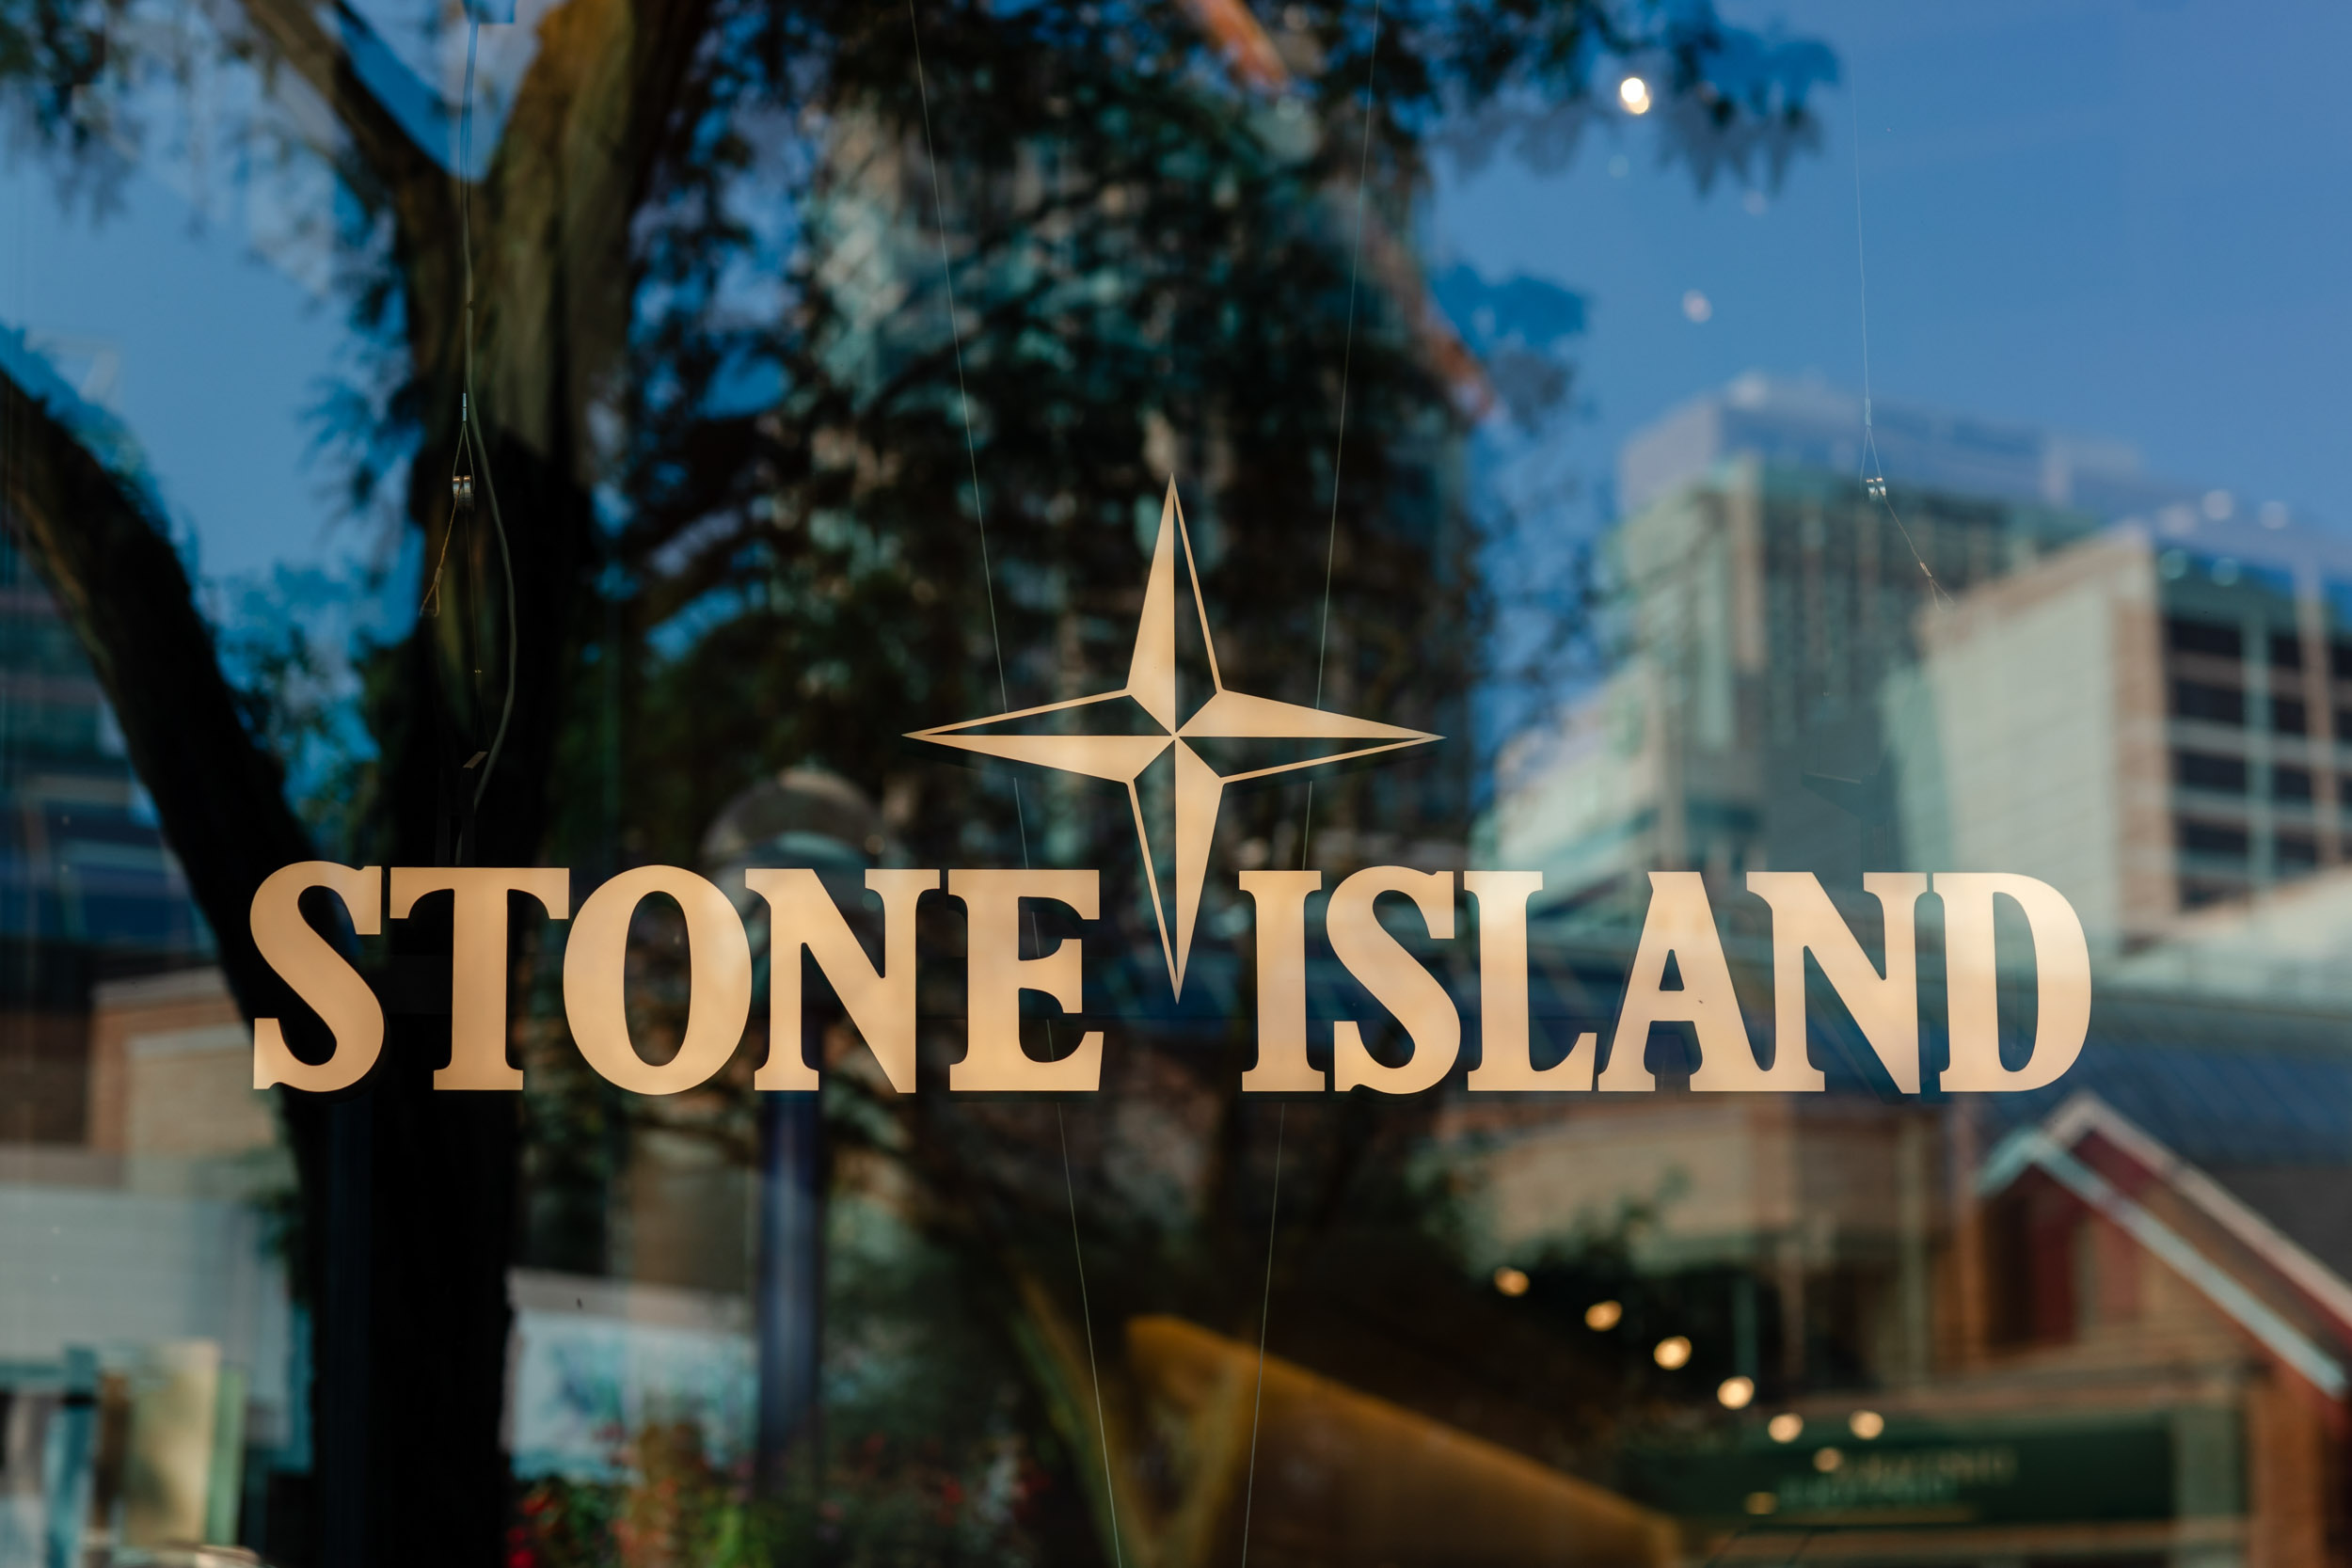 The Stone Island logo is reflected in the glass of a building.